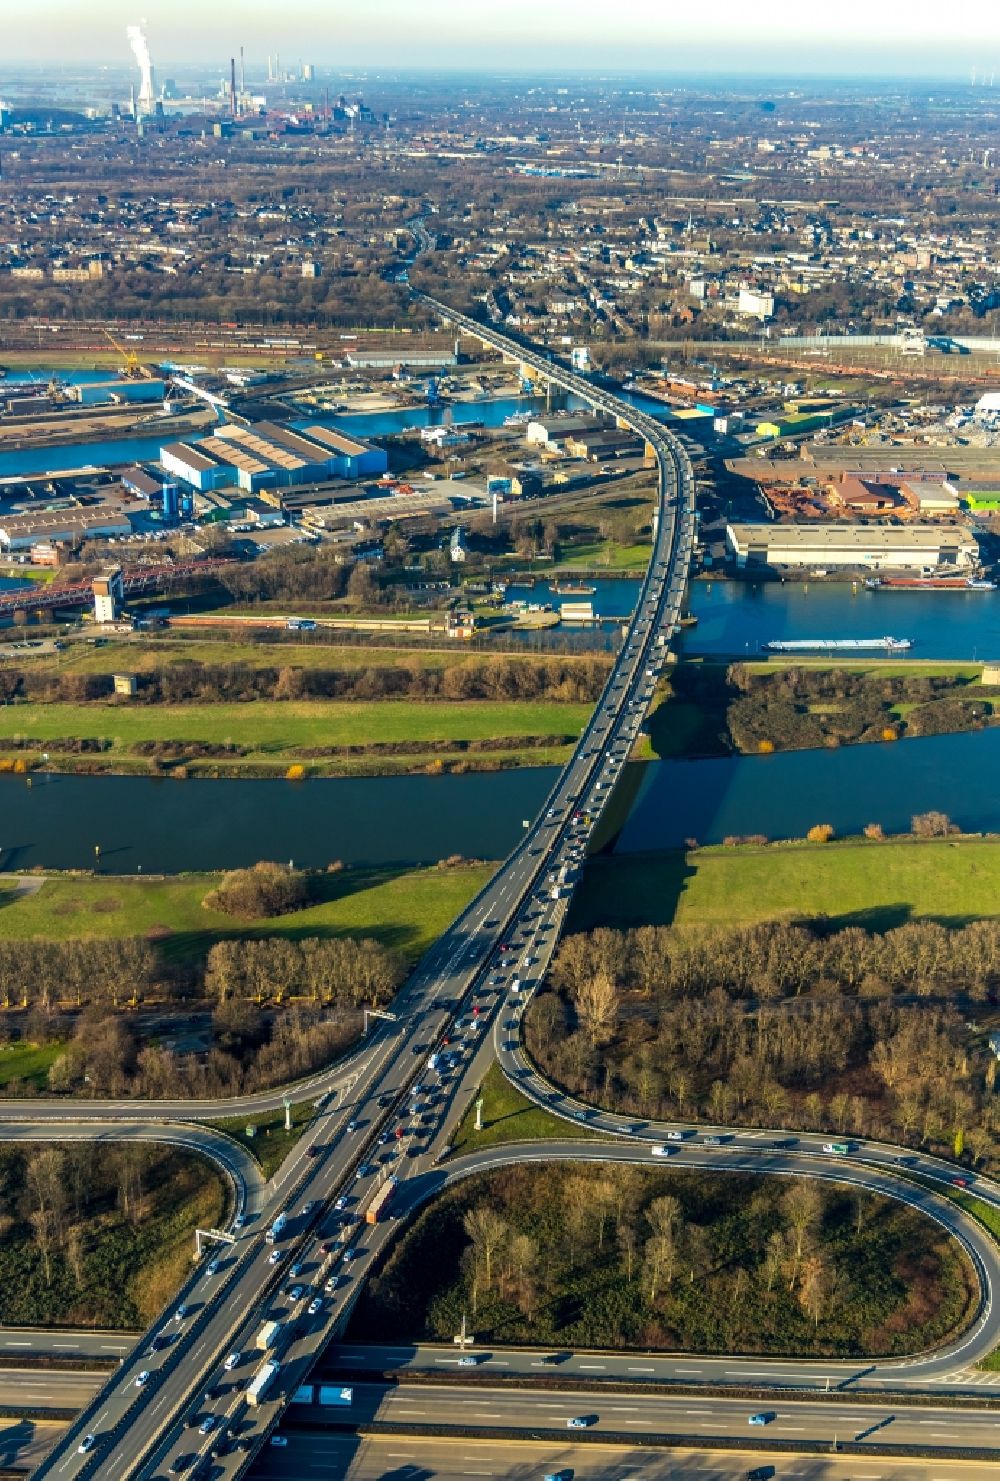 Aerial photograph Duisburg - Routing and traffic lanes over the highway bridge in the motorway A 59 over the Rhine river course in Duisburg in the state North Rhine-Westphalia, Germany